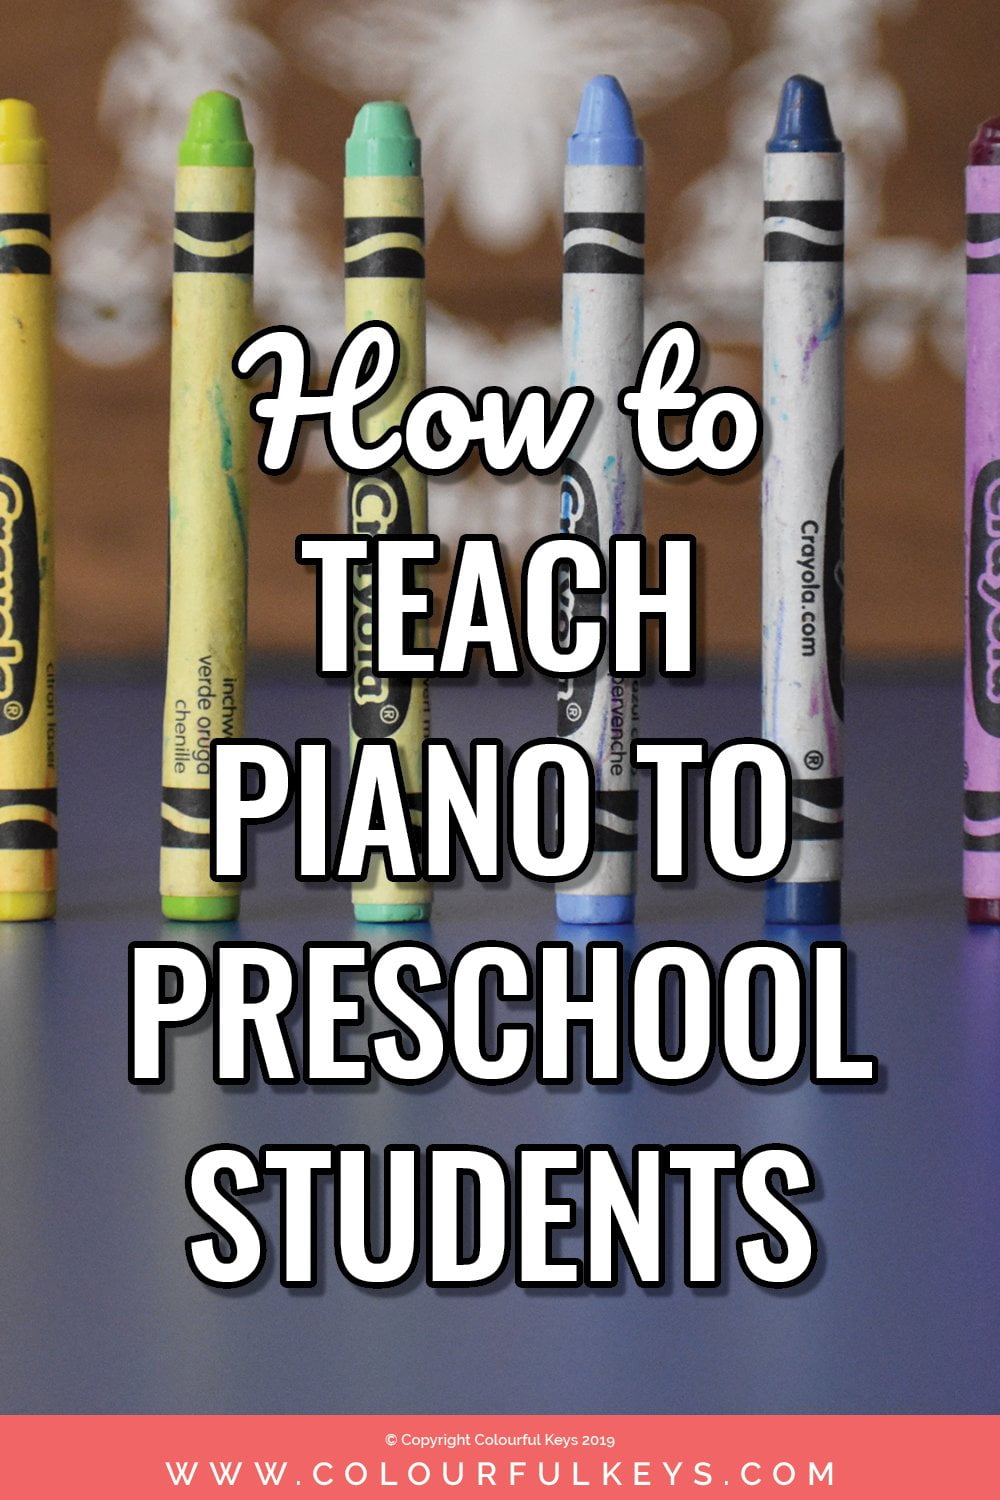 Why every preschool piano lesson should include improvisation and some improvisation ideas to try with your preschool piano students